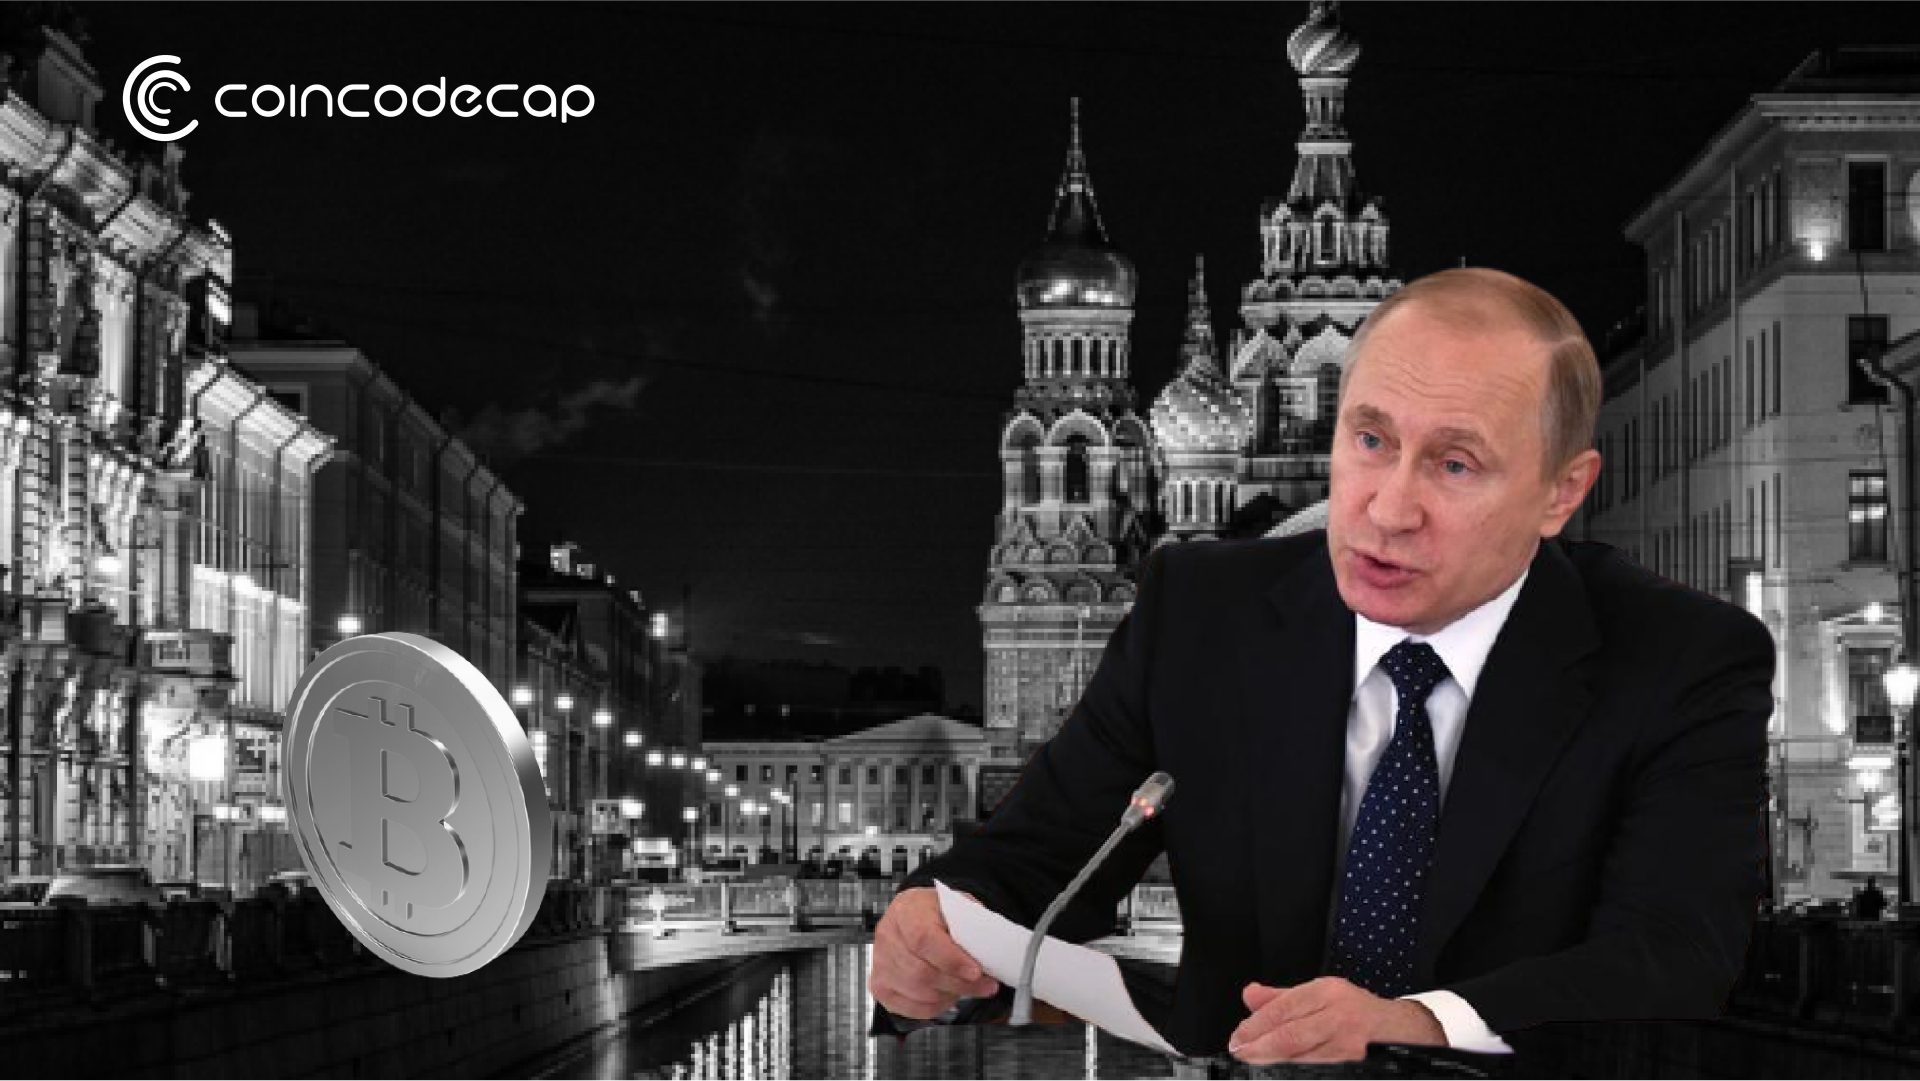 Vladimir Putin Accepts The Role Of Crypto As Payments